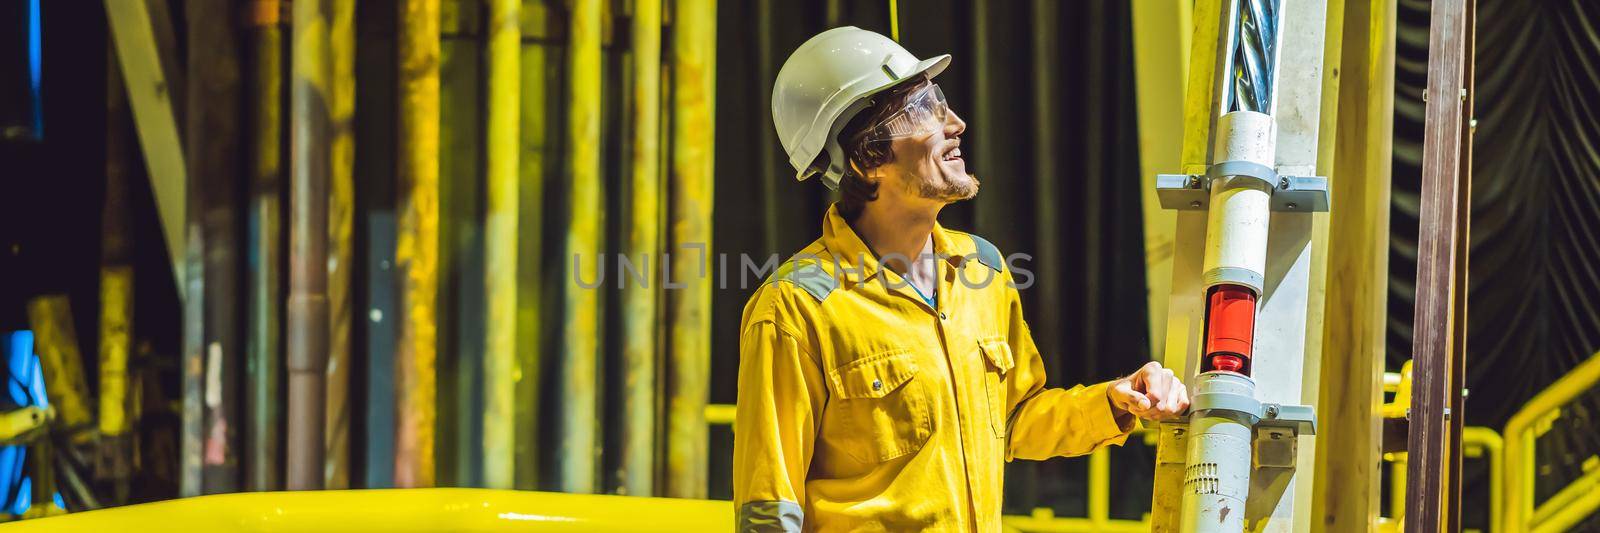 Young man in a yellow work uniform, glasses and helmet in industrial environment,oil Platform or liquefied gas plant BANNER, LONG FORMAT by galitskaya